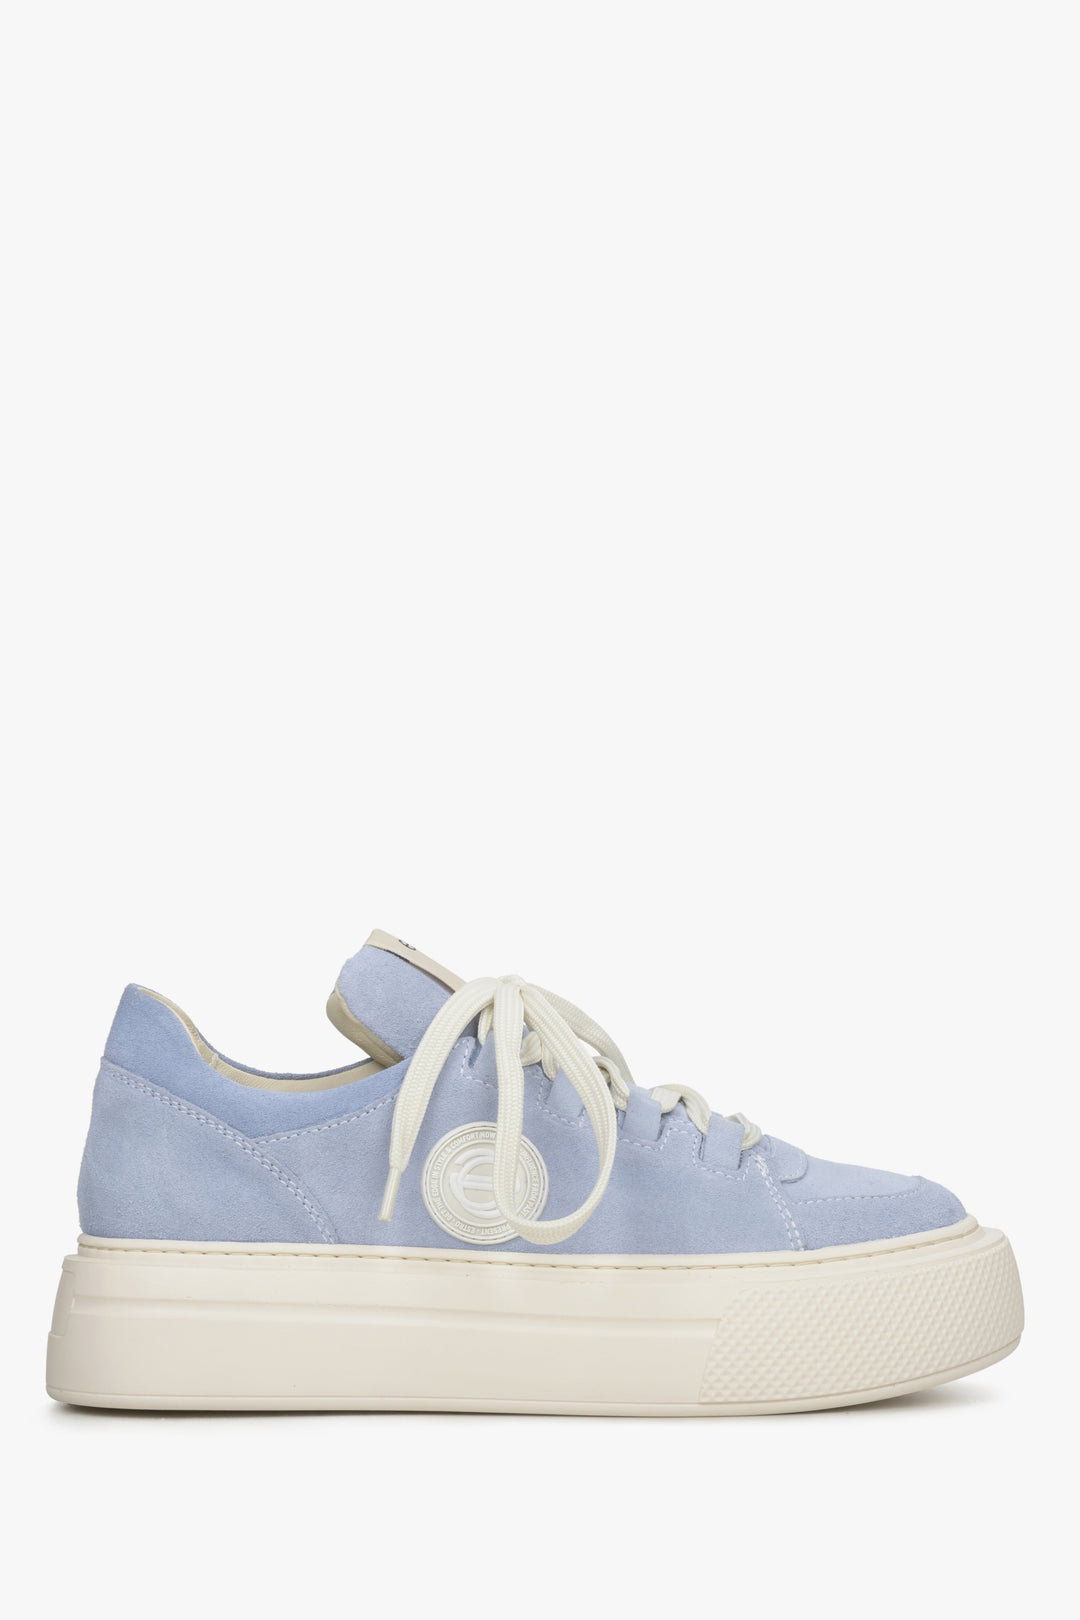 Women's blue sneakers on a thick sole - shoe profile.